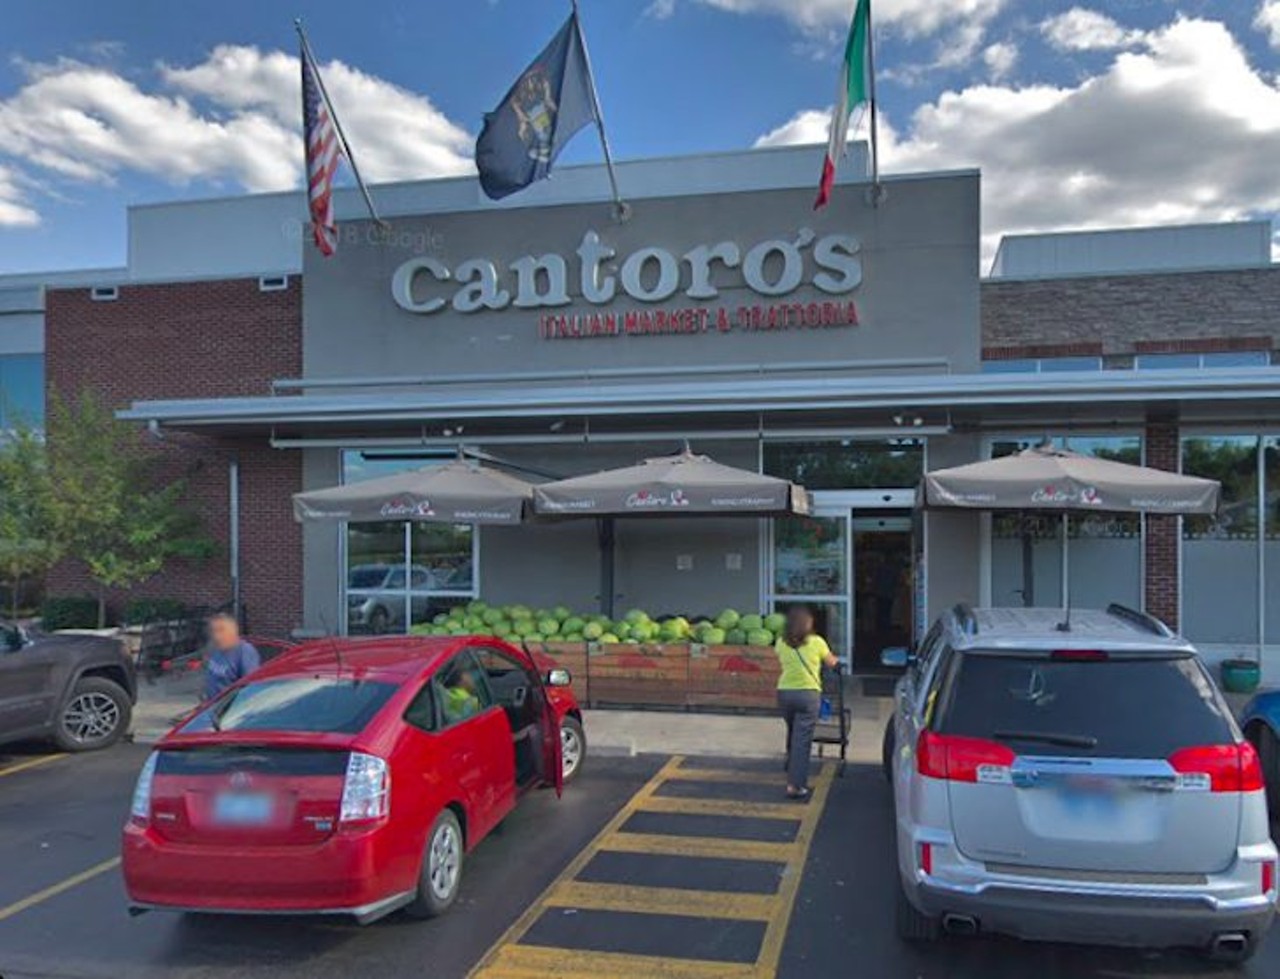 12. Cantoro Italian Market
15550 N. Haggerty Rd., Plymouth; 734-420-1100
&#147;This is a great place to go to - lots of authentic Italian foods and wines to purchase. They also have a bakery with a huge selection of treats.
Make a reservation at the restaurant and try the authentic Italian dishes. The pizzas are fresh and delicious. I also had the risotto which was just perfect - not too heavy or salty.&#148; - Anna K.
Photo via Google Maps